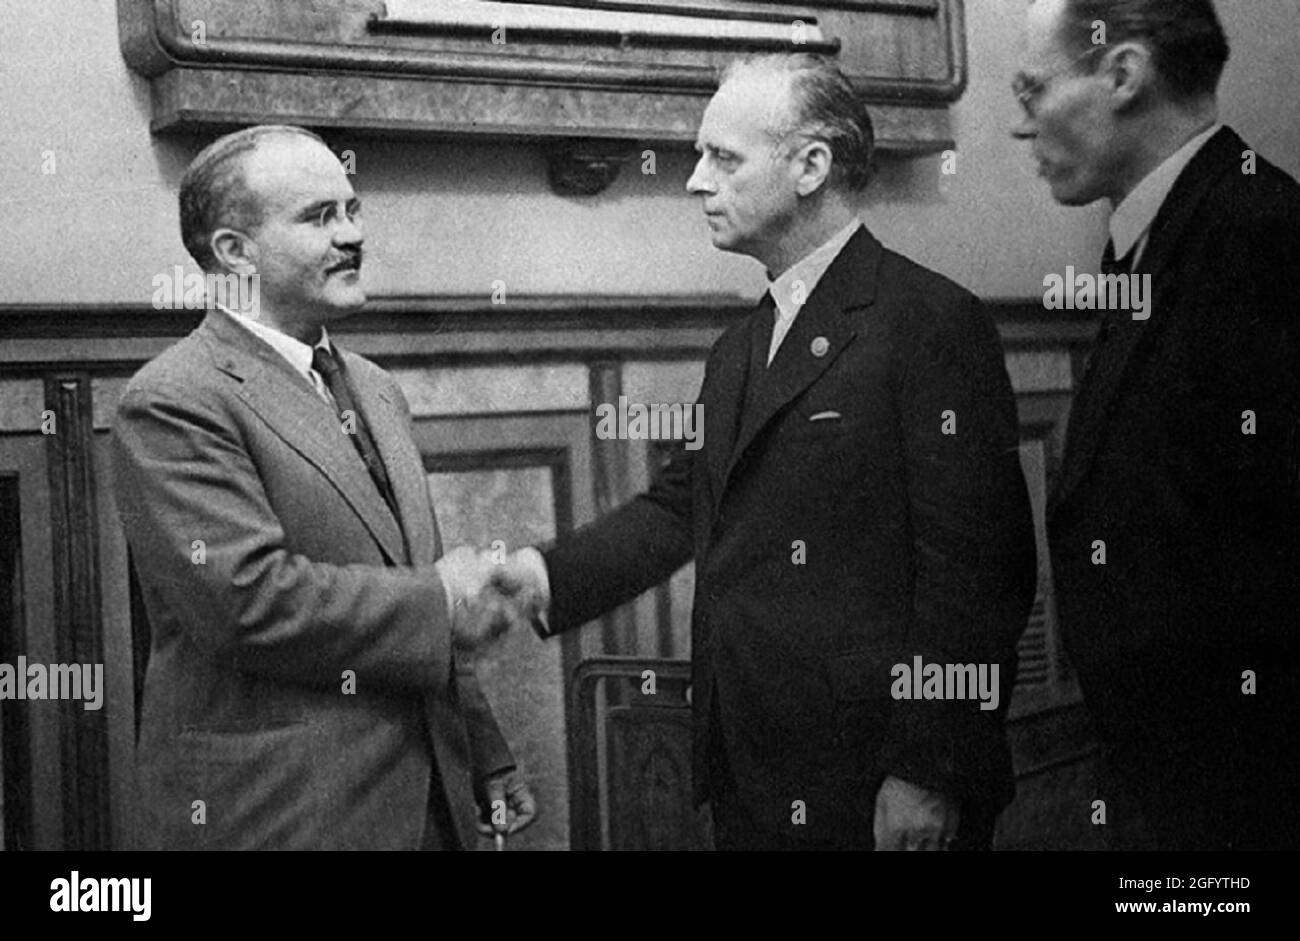 Soviet Foreign Minister Vyacheslav Molotov and German Foreign Minister Joachim von Ribbentrop shaking hands after signing the Friendship and Border Treaty between the USSR and Germany (aka the Nazi-Soviet Pact or the Molotov-Ribbentrop Pact) Stock Photo